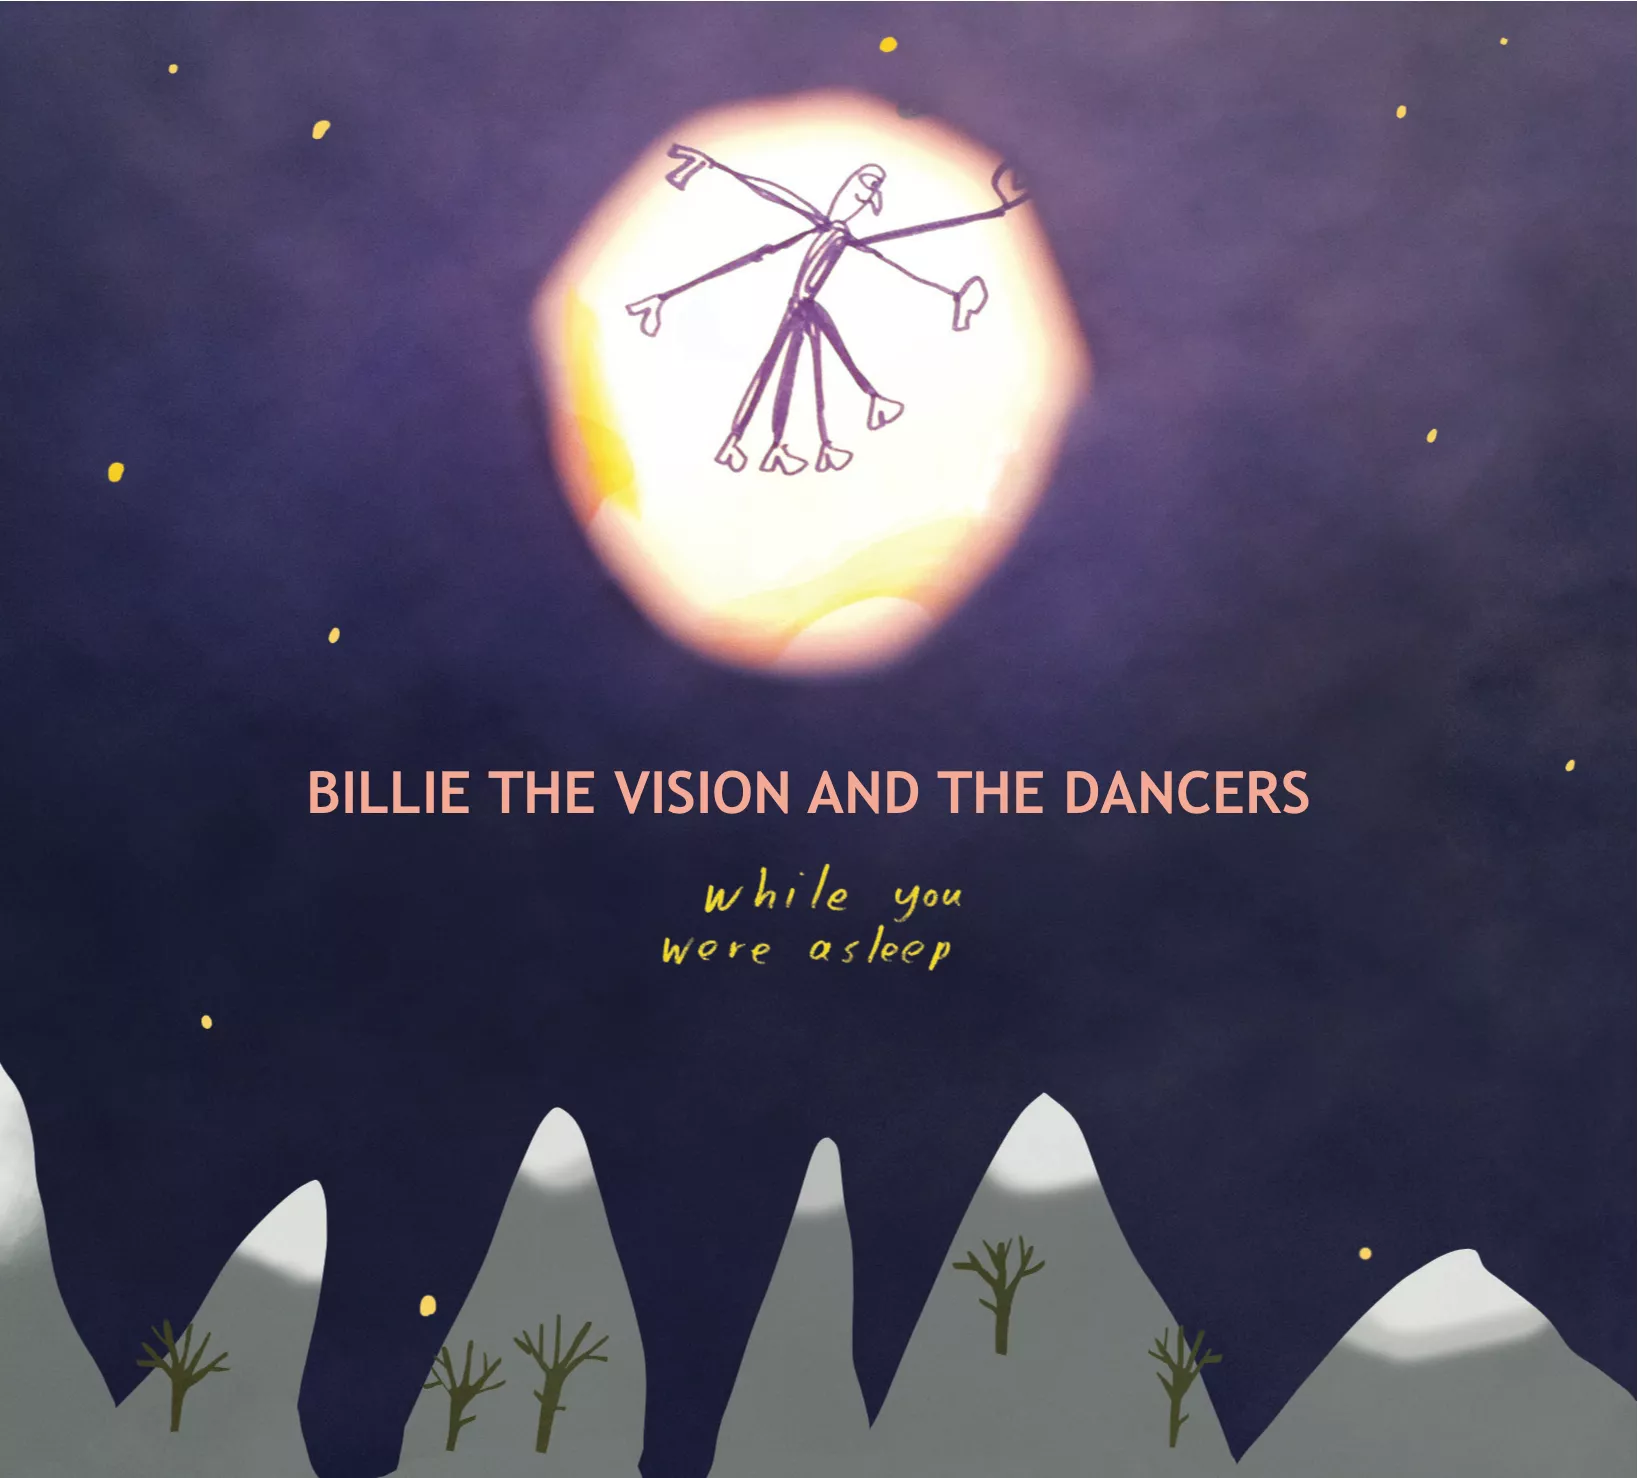 While You Were Asleep - Billie the Vision & the Dancers